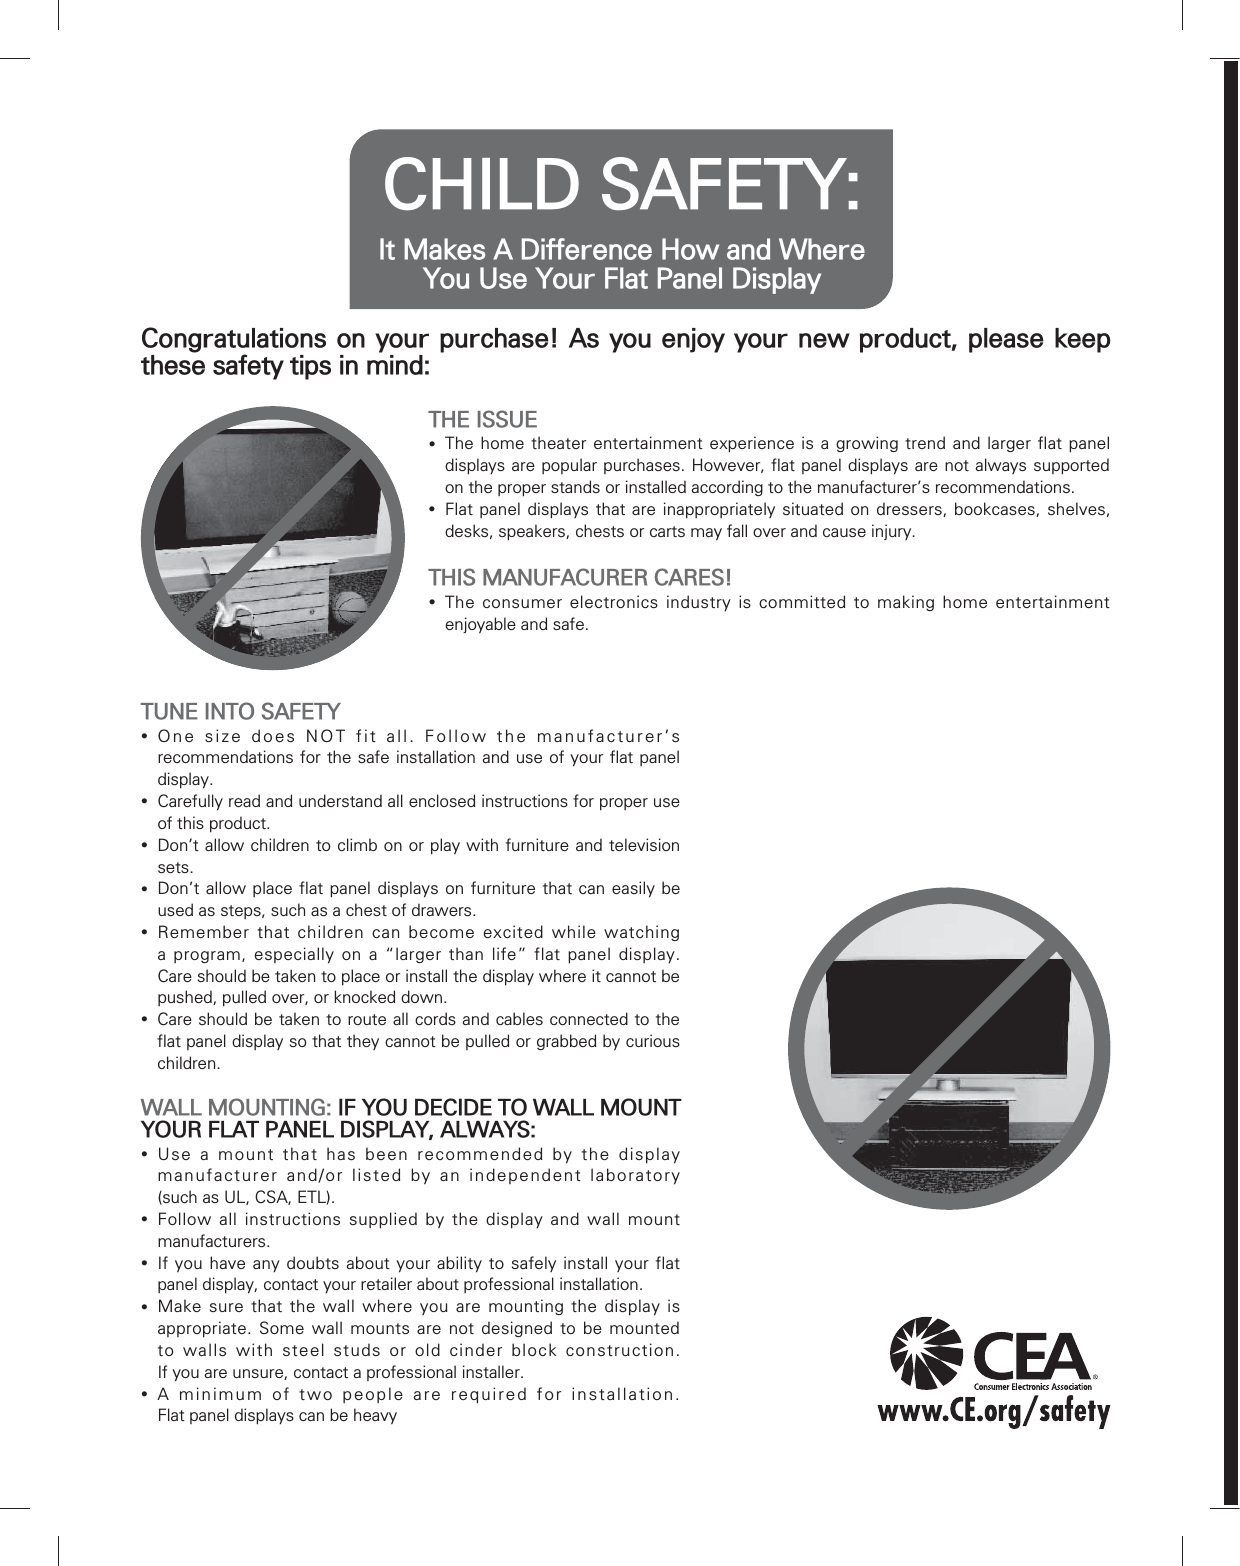 CHILD SAFETY: It Makes A Difference How and Where You Use Your Flat Panel DisplayCongratulations on your purchase! As you enjoy your new product, please keep these safety tips in mind:THE ISSUE yThe home theater entertainment experience is a growing trend and larger flat panel displays are popular purchases. However, flat panel displays are not always supported on the proper stands or installed according to the manufacturer’s recommendations. yFlat panel displays that are inappropriately situated on dressers, bookcases, shelves, desks, speakers, chests or carts may fall over and cause injury.THIS MANUFACURER CARES! yThe consumer electronics industry is committed to making home entertainment enjoyable and safe.TUNE INTO SAFETY yOne size does NOT fit all. Follow the manufacturer’s recommendations for the safe installation and use of your flat panel display. yCarefully read and understand all enclosed instructions for proper use of this product. yDon’t allow children to climb on or play with furniture and television sets. yDon’t allow place flat panel displays on furniture that can easily be used as steps, such as a chest of drawers. yRemember that children can become excited while watching a program, especially on a “larger than life” flat panel display.  Care should be taken to place or install the display where it cannot be pushed, pulled over, or knocked down. yCare should be taken to route all cords and cables connected to the flat panel display so that they cannot be pulled or grabbed by curious children.WALL MOUNTING: IF YOU DECIDE TO WALL MOUNT YOUR FLAT PANEL DISPLAY, ALWAYS: yUse a mount that has been recommended by the display manufacturer and/or listed by an independent laboratory  (such as UL, CSA, ETL). yFollow all instructions supplied by the display and wall mount manufacturers. yIf you have any doubts about your ability to safely install your flat panel display, contact your retailer about professional installation. yMake sure that the wall where you are mounting the display is appropriate. Some wall mounts are not designed to be mounted to walls with steel studs or old cinder block construction.  If you are unsure, contact a professional installer. yA minimum of two people are required for installation.  Flat panel displays can be heavy